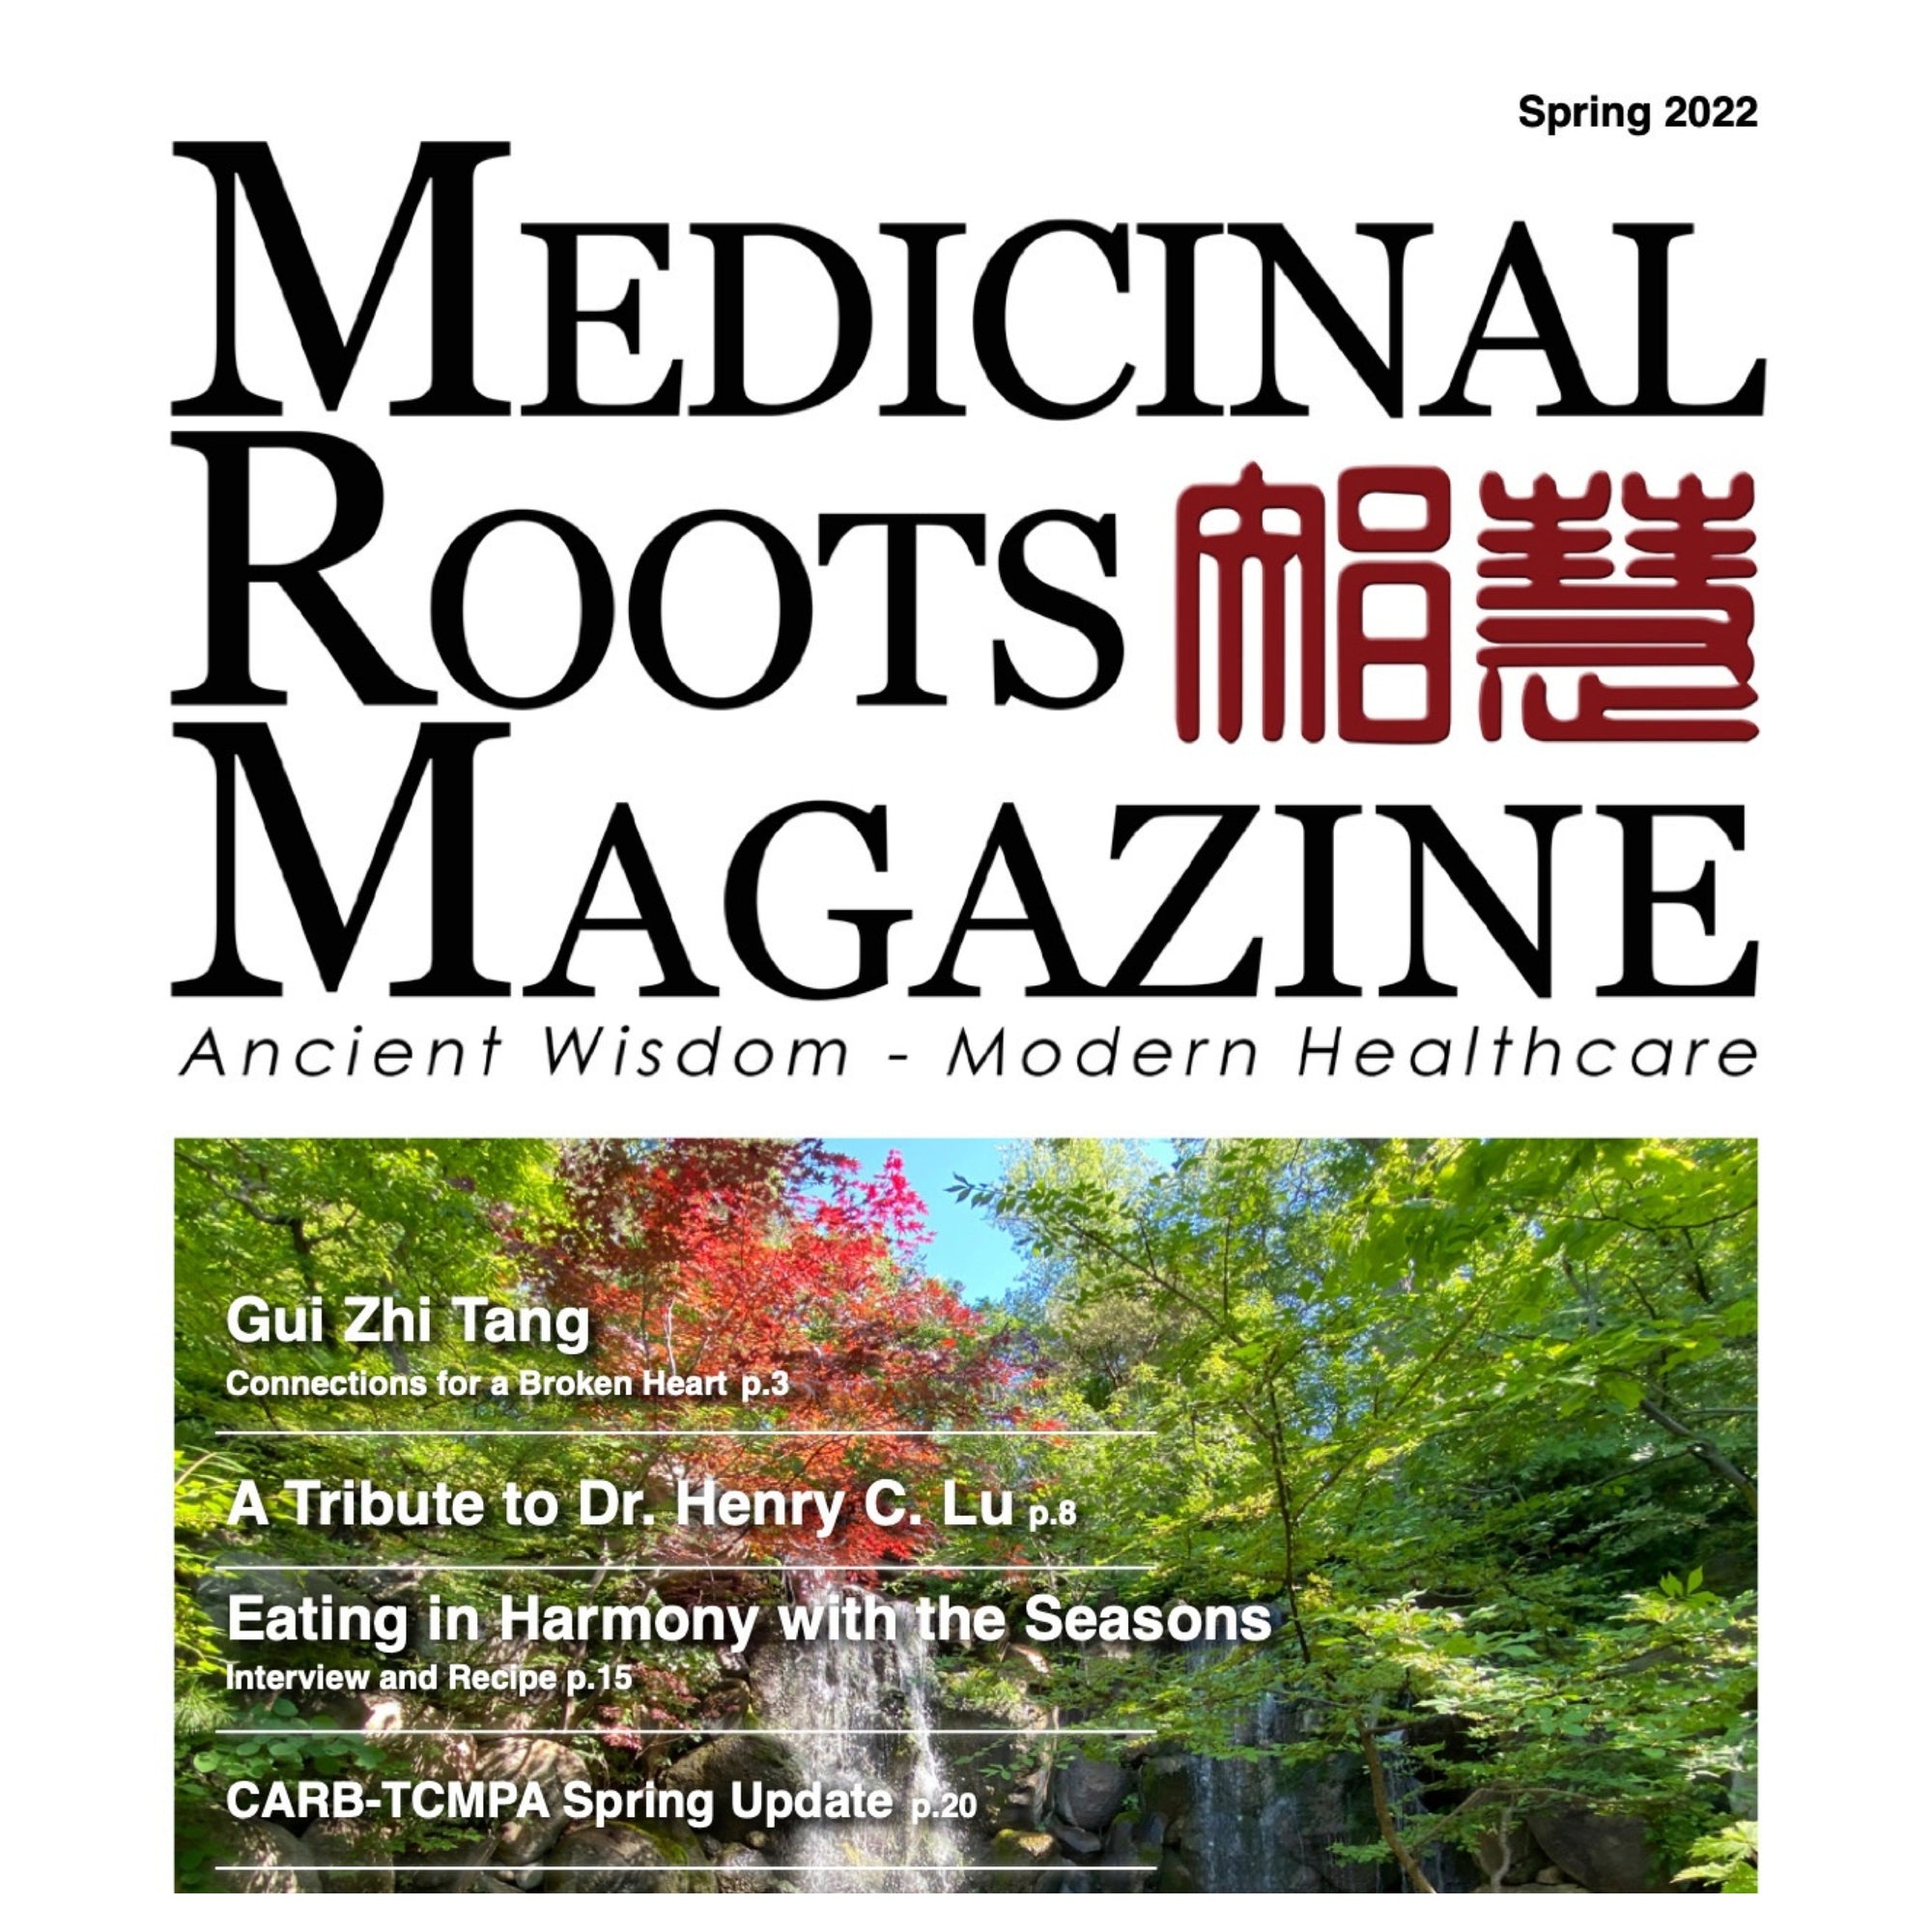 Chat With Medicinal Roots Magazine